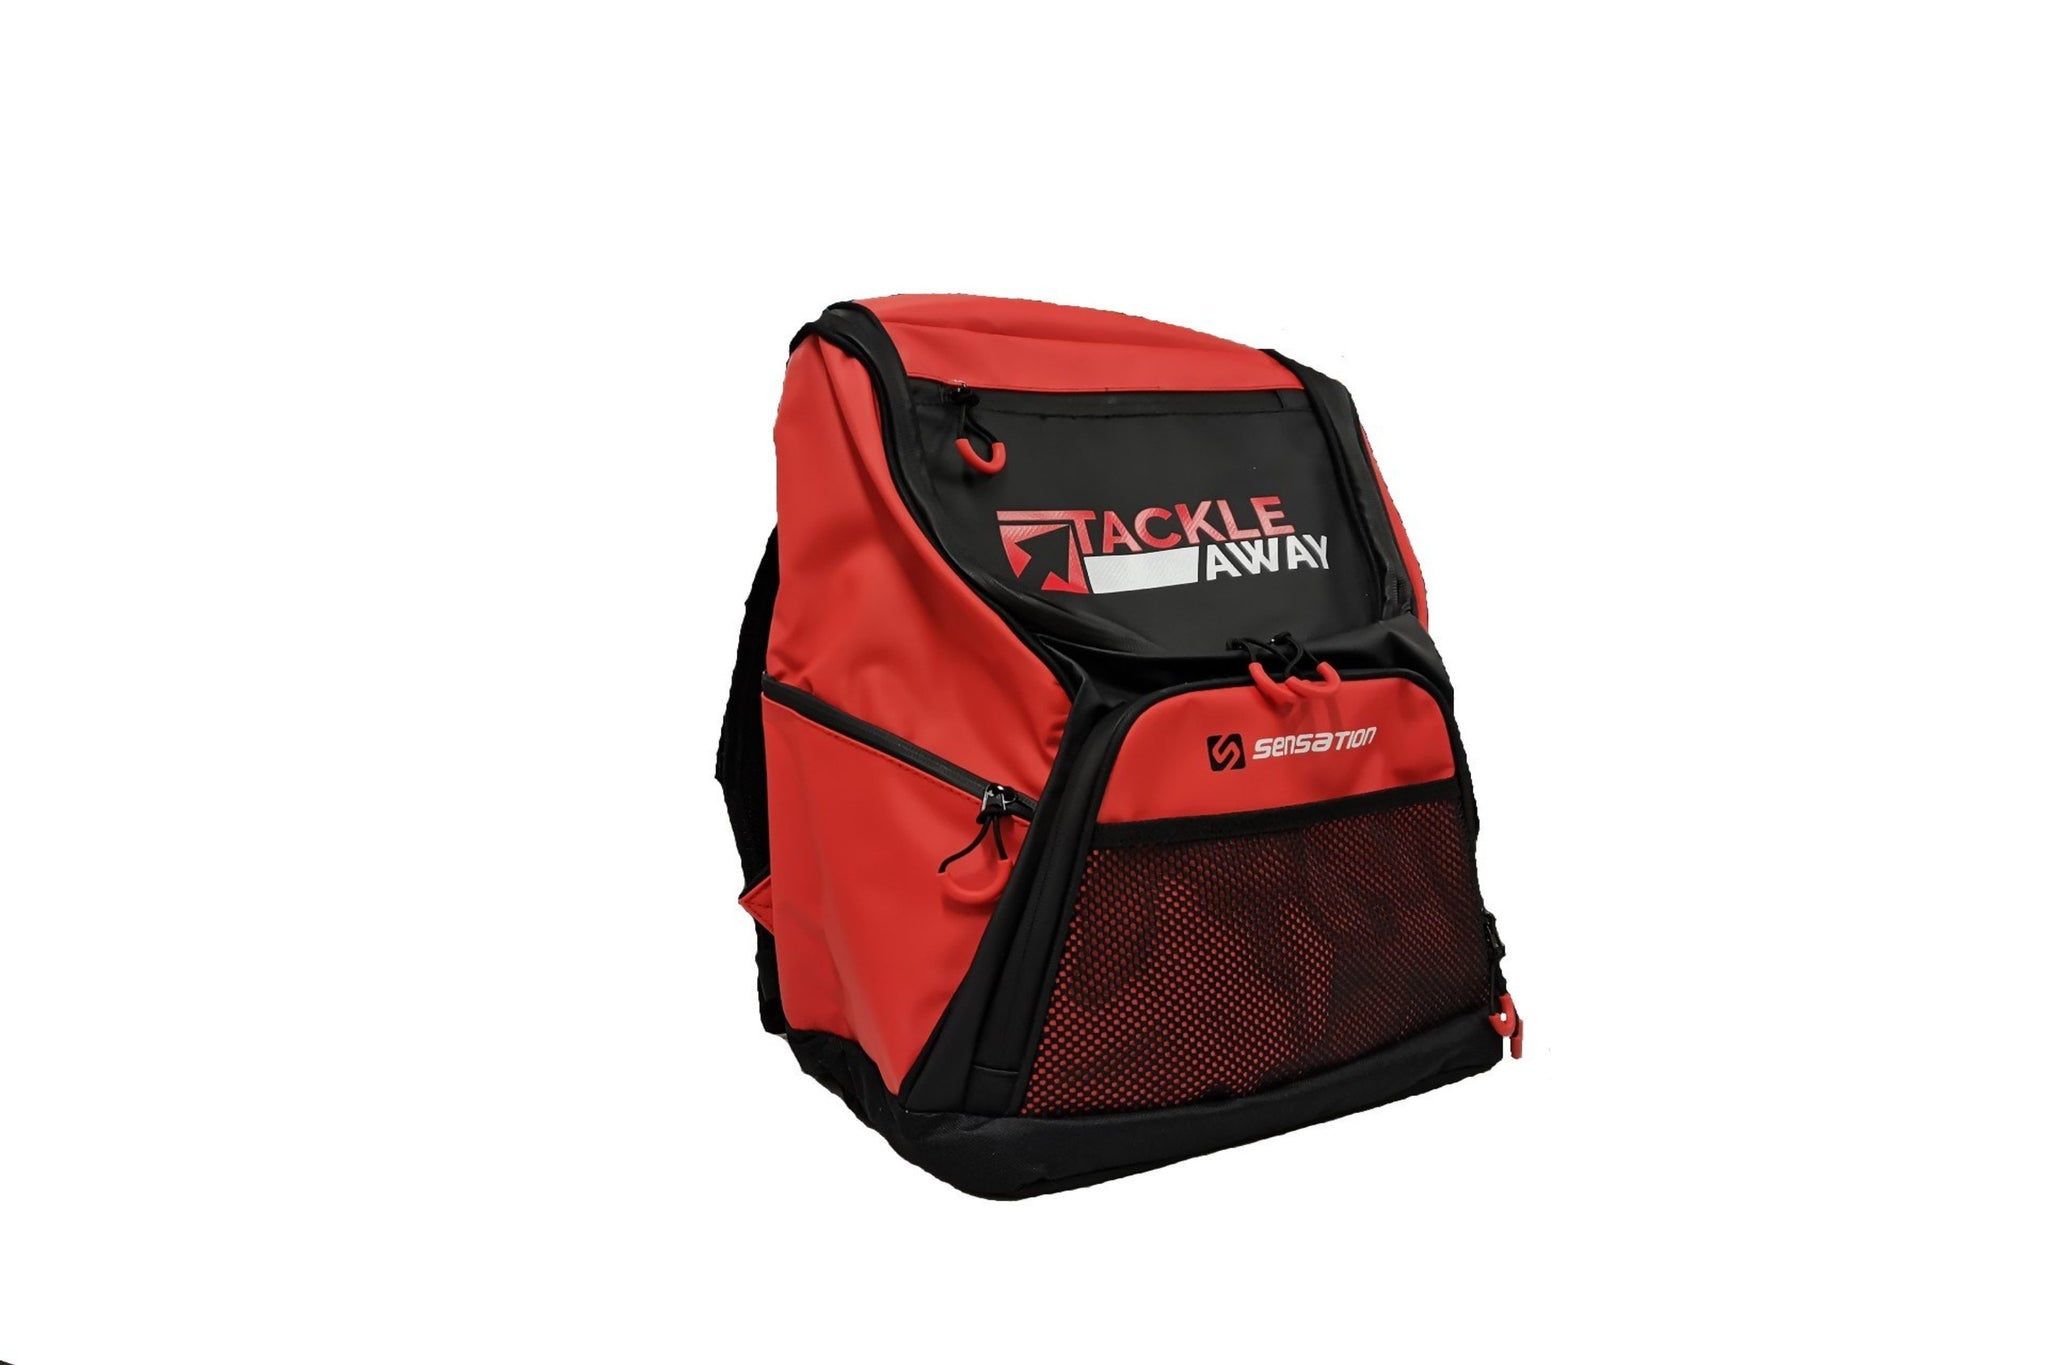 Sensation Tackle Away Rogue Bag - The Fishing Specialist